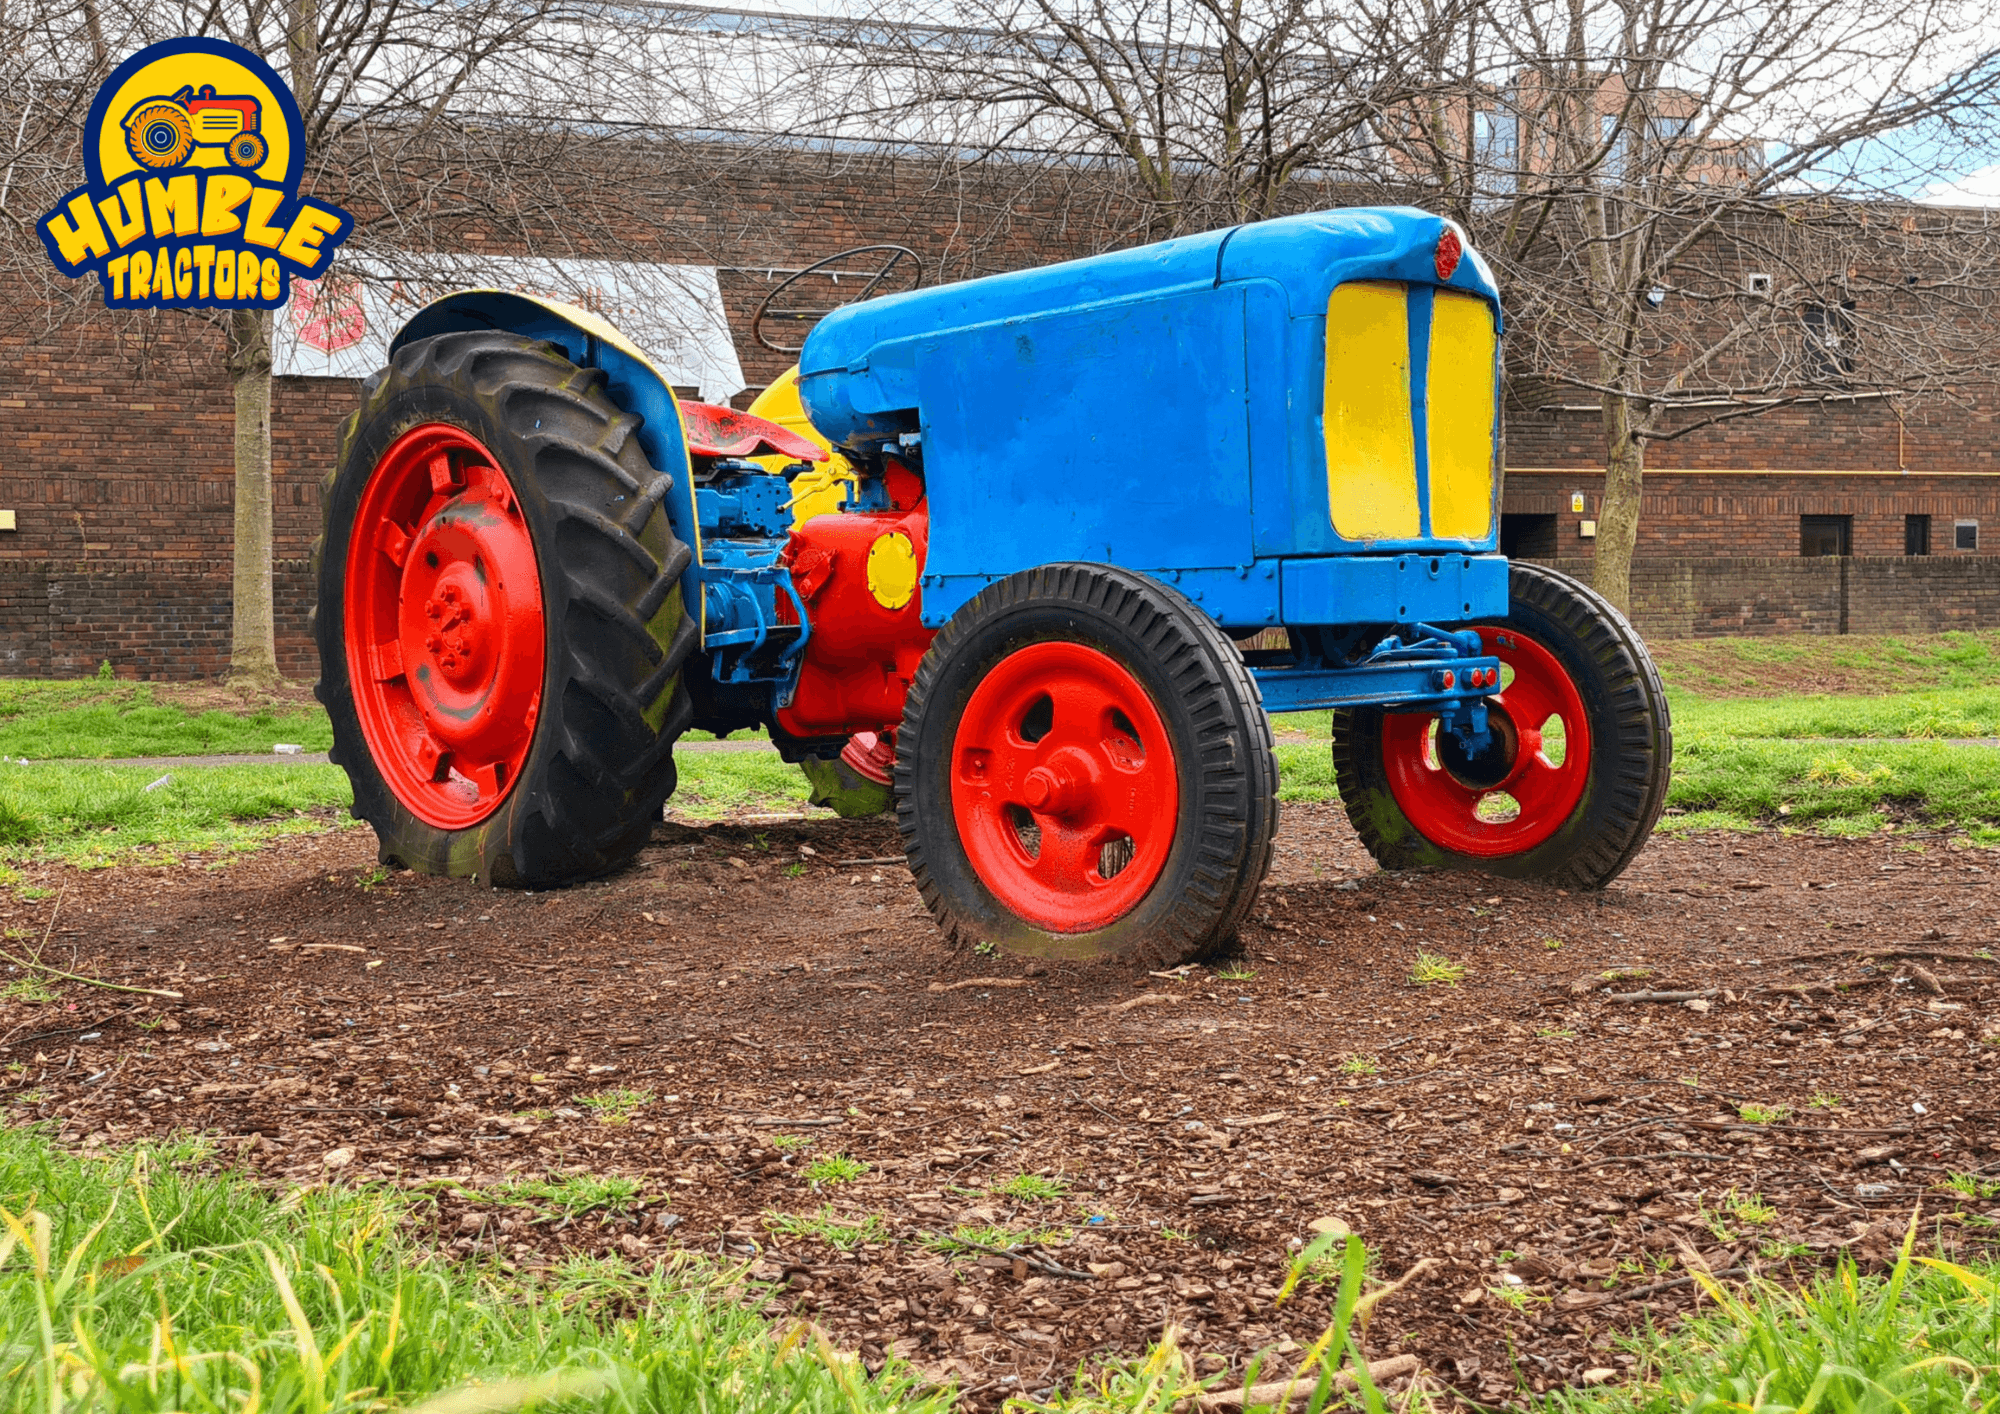 Humble Tractor #60